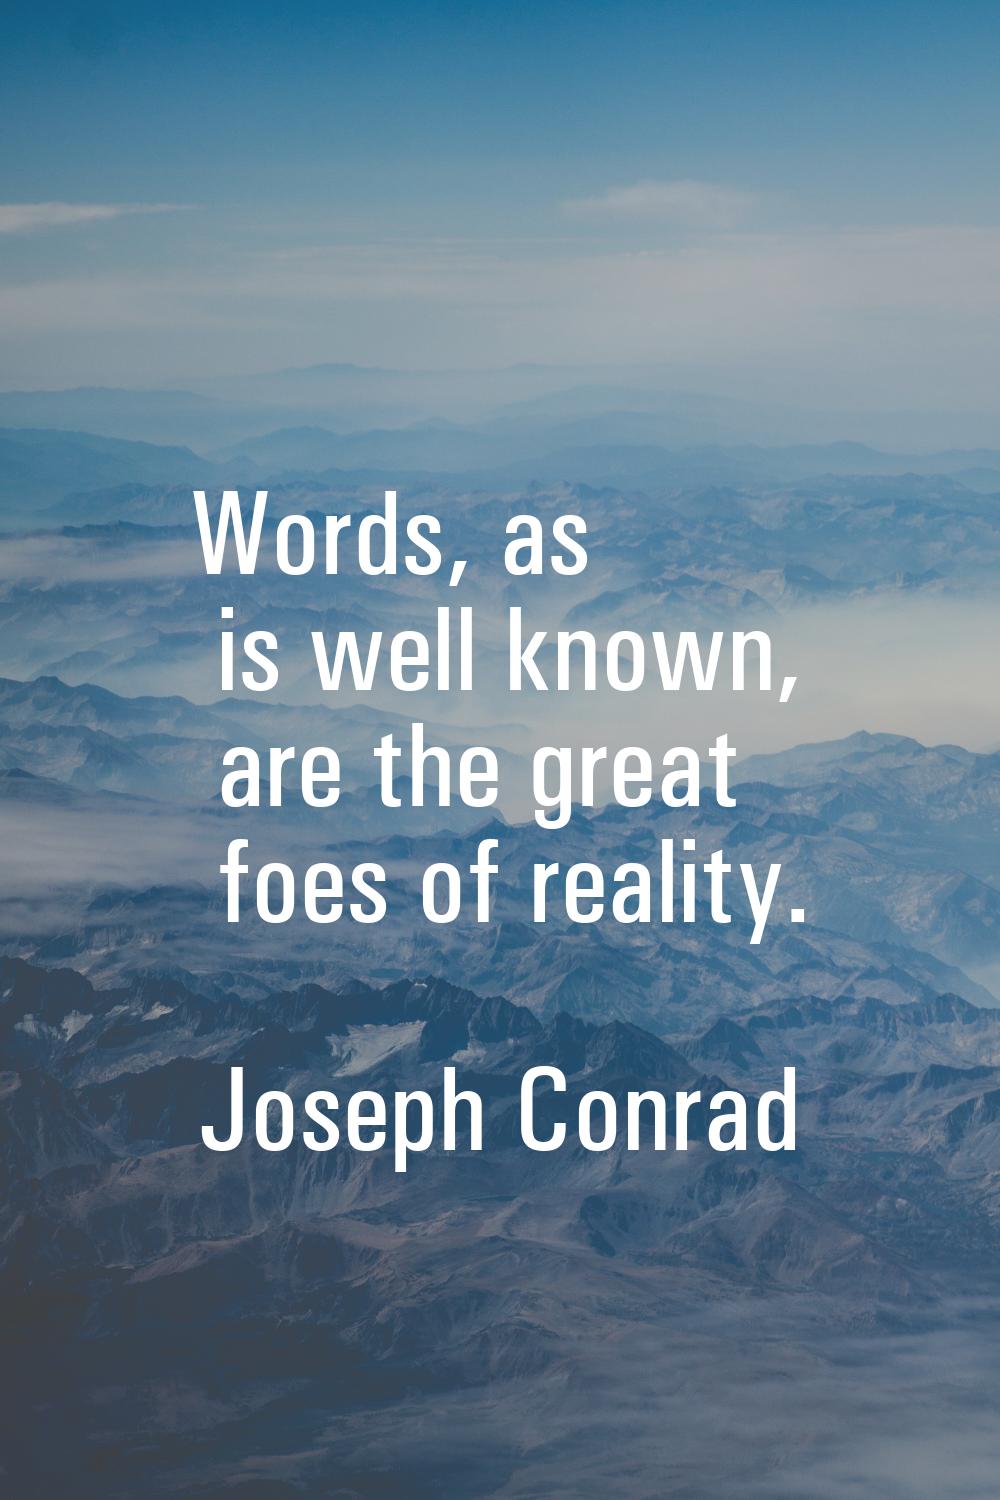 Words, as is well known, are the great foes of reality.